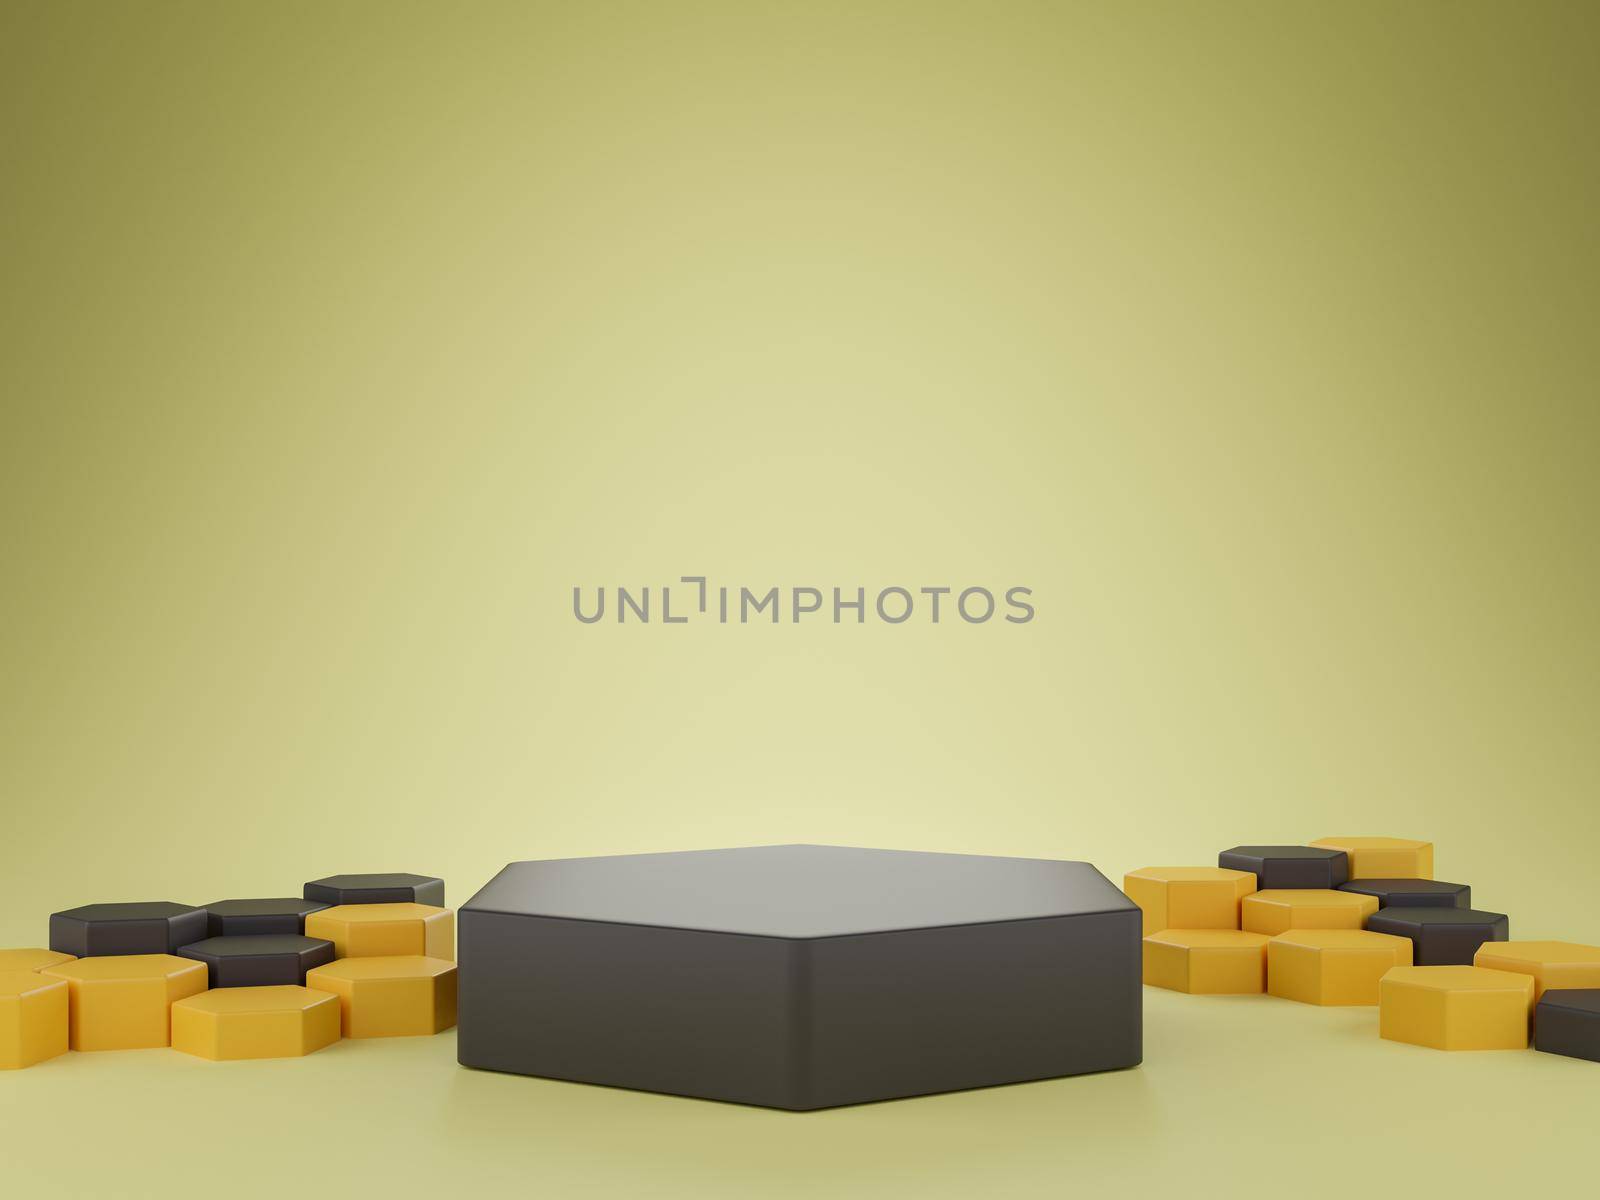 Black pedestal and yellow backdrop showcase, product presentation. 3D Rendering.